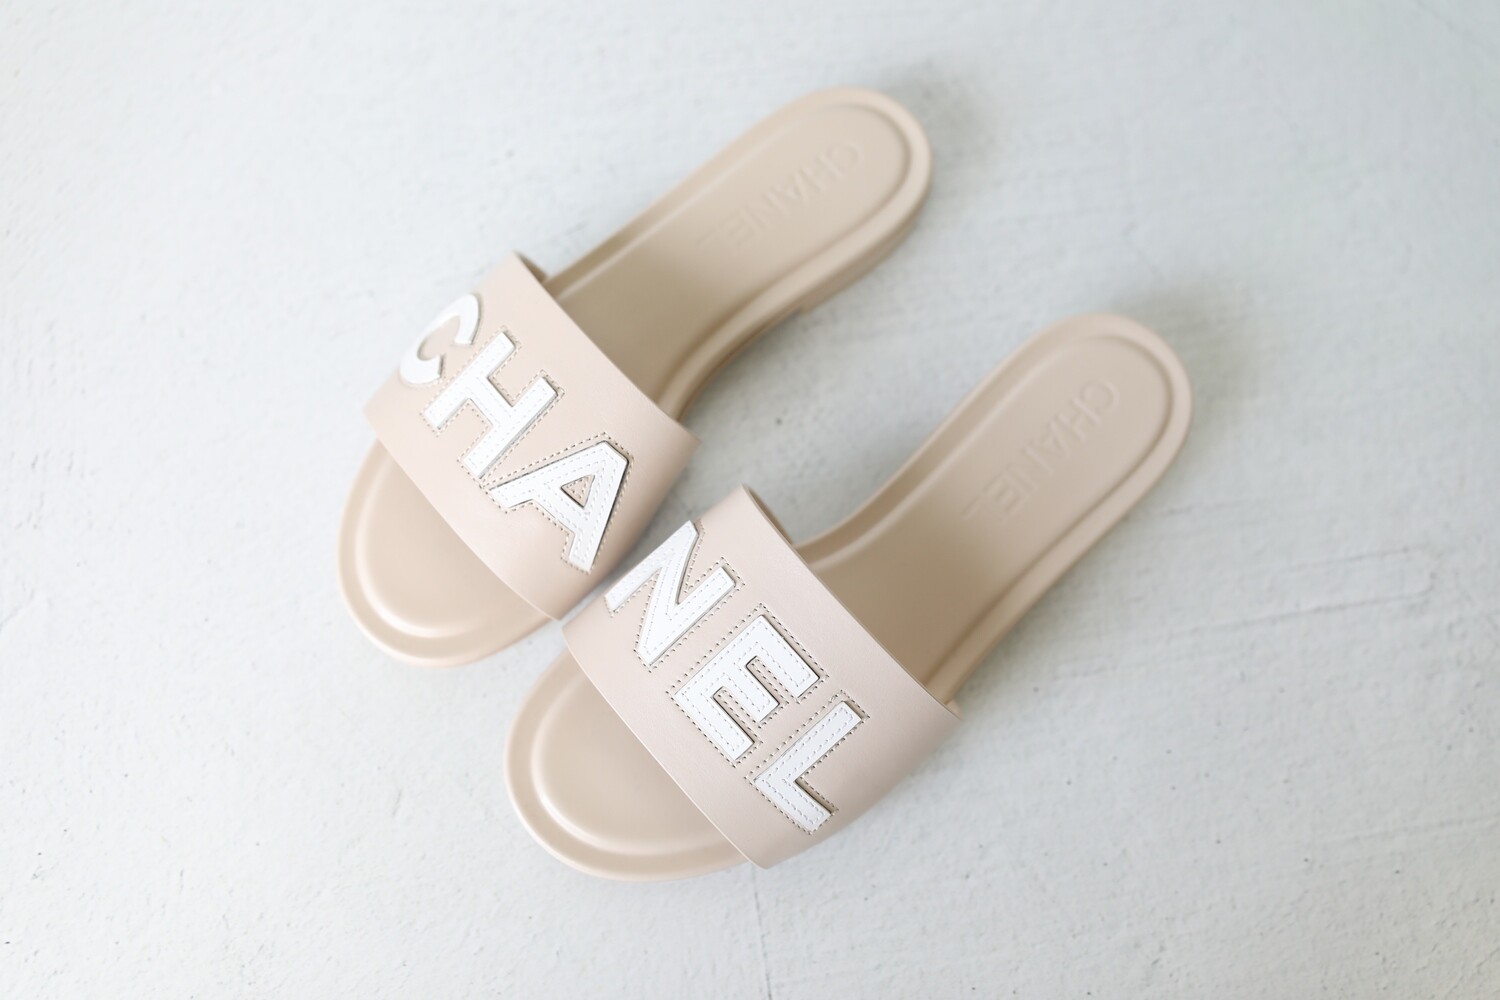 Chanel Slide Sandals, Beige and White, Size 38, New in Box WA001